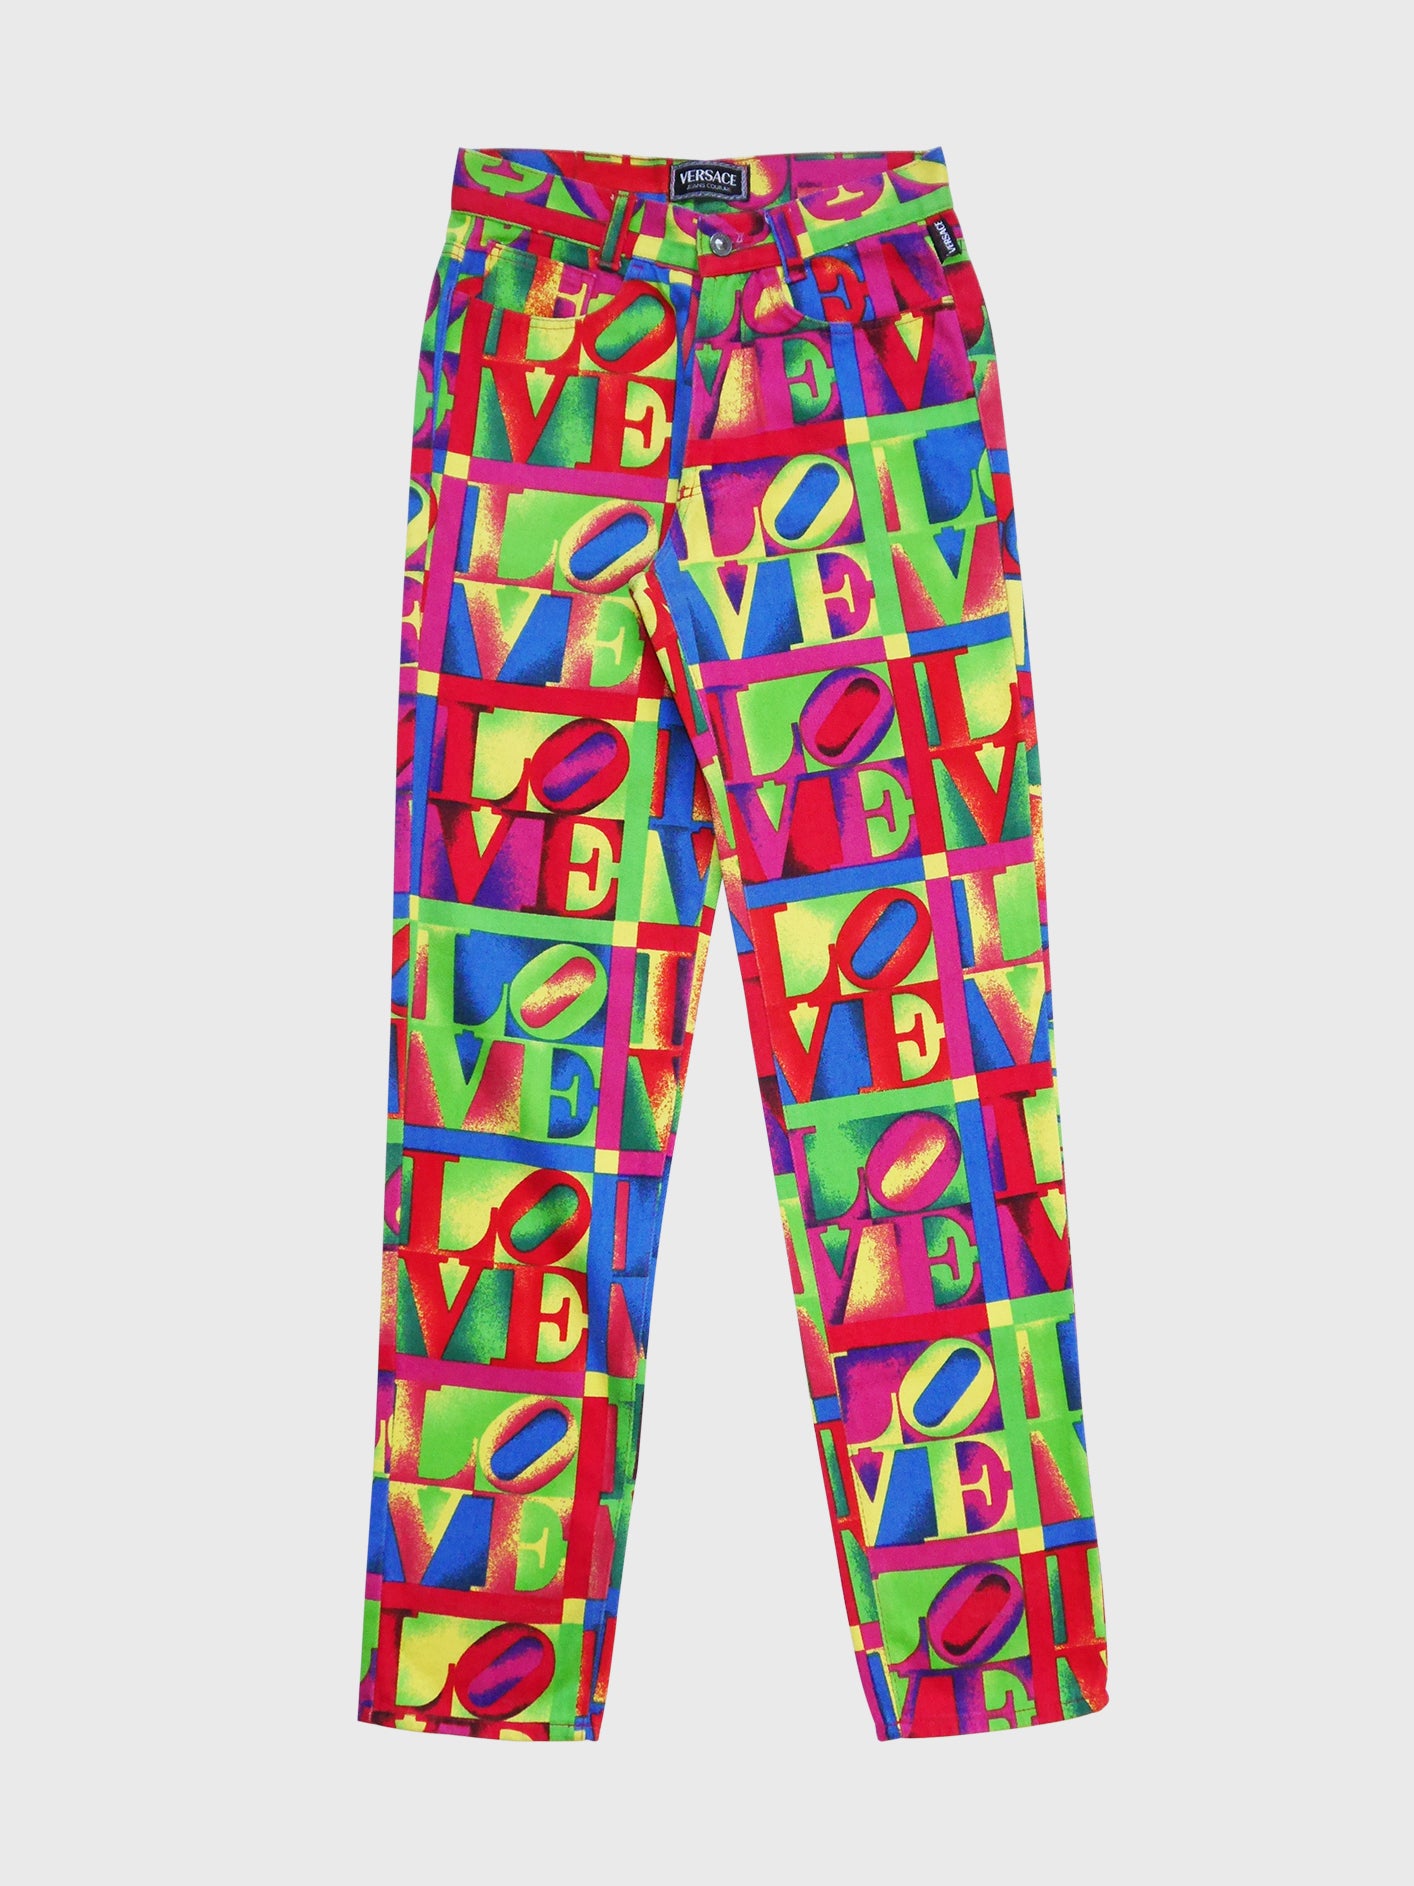 VERSACE Jeans Couture Spring 1995 Vintage Robert Indiana LOVE Print Denim Pants Size S